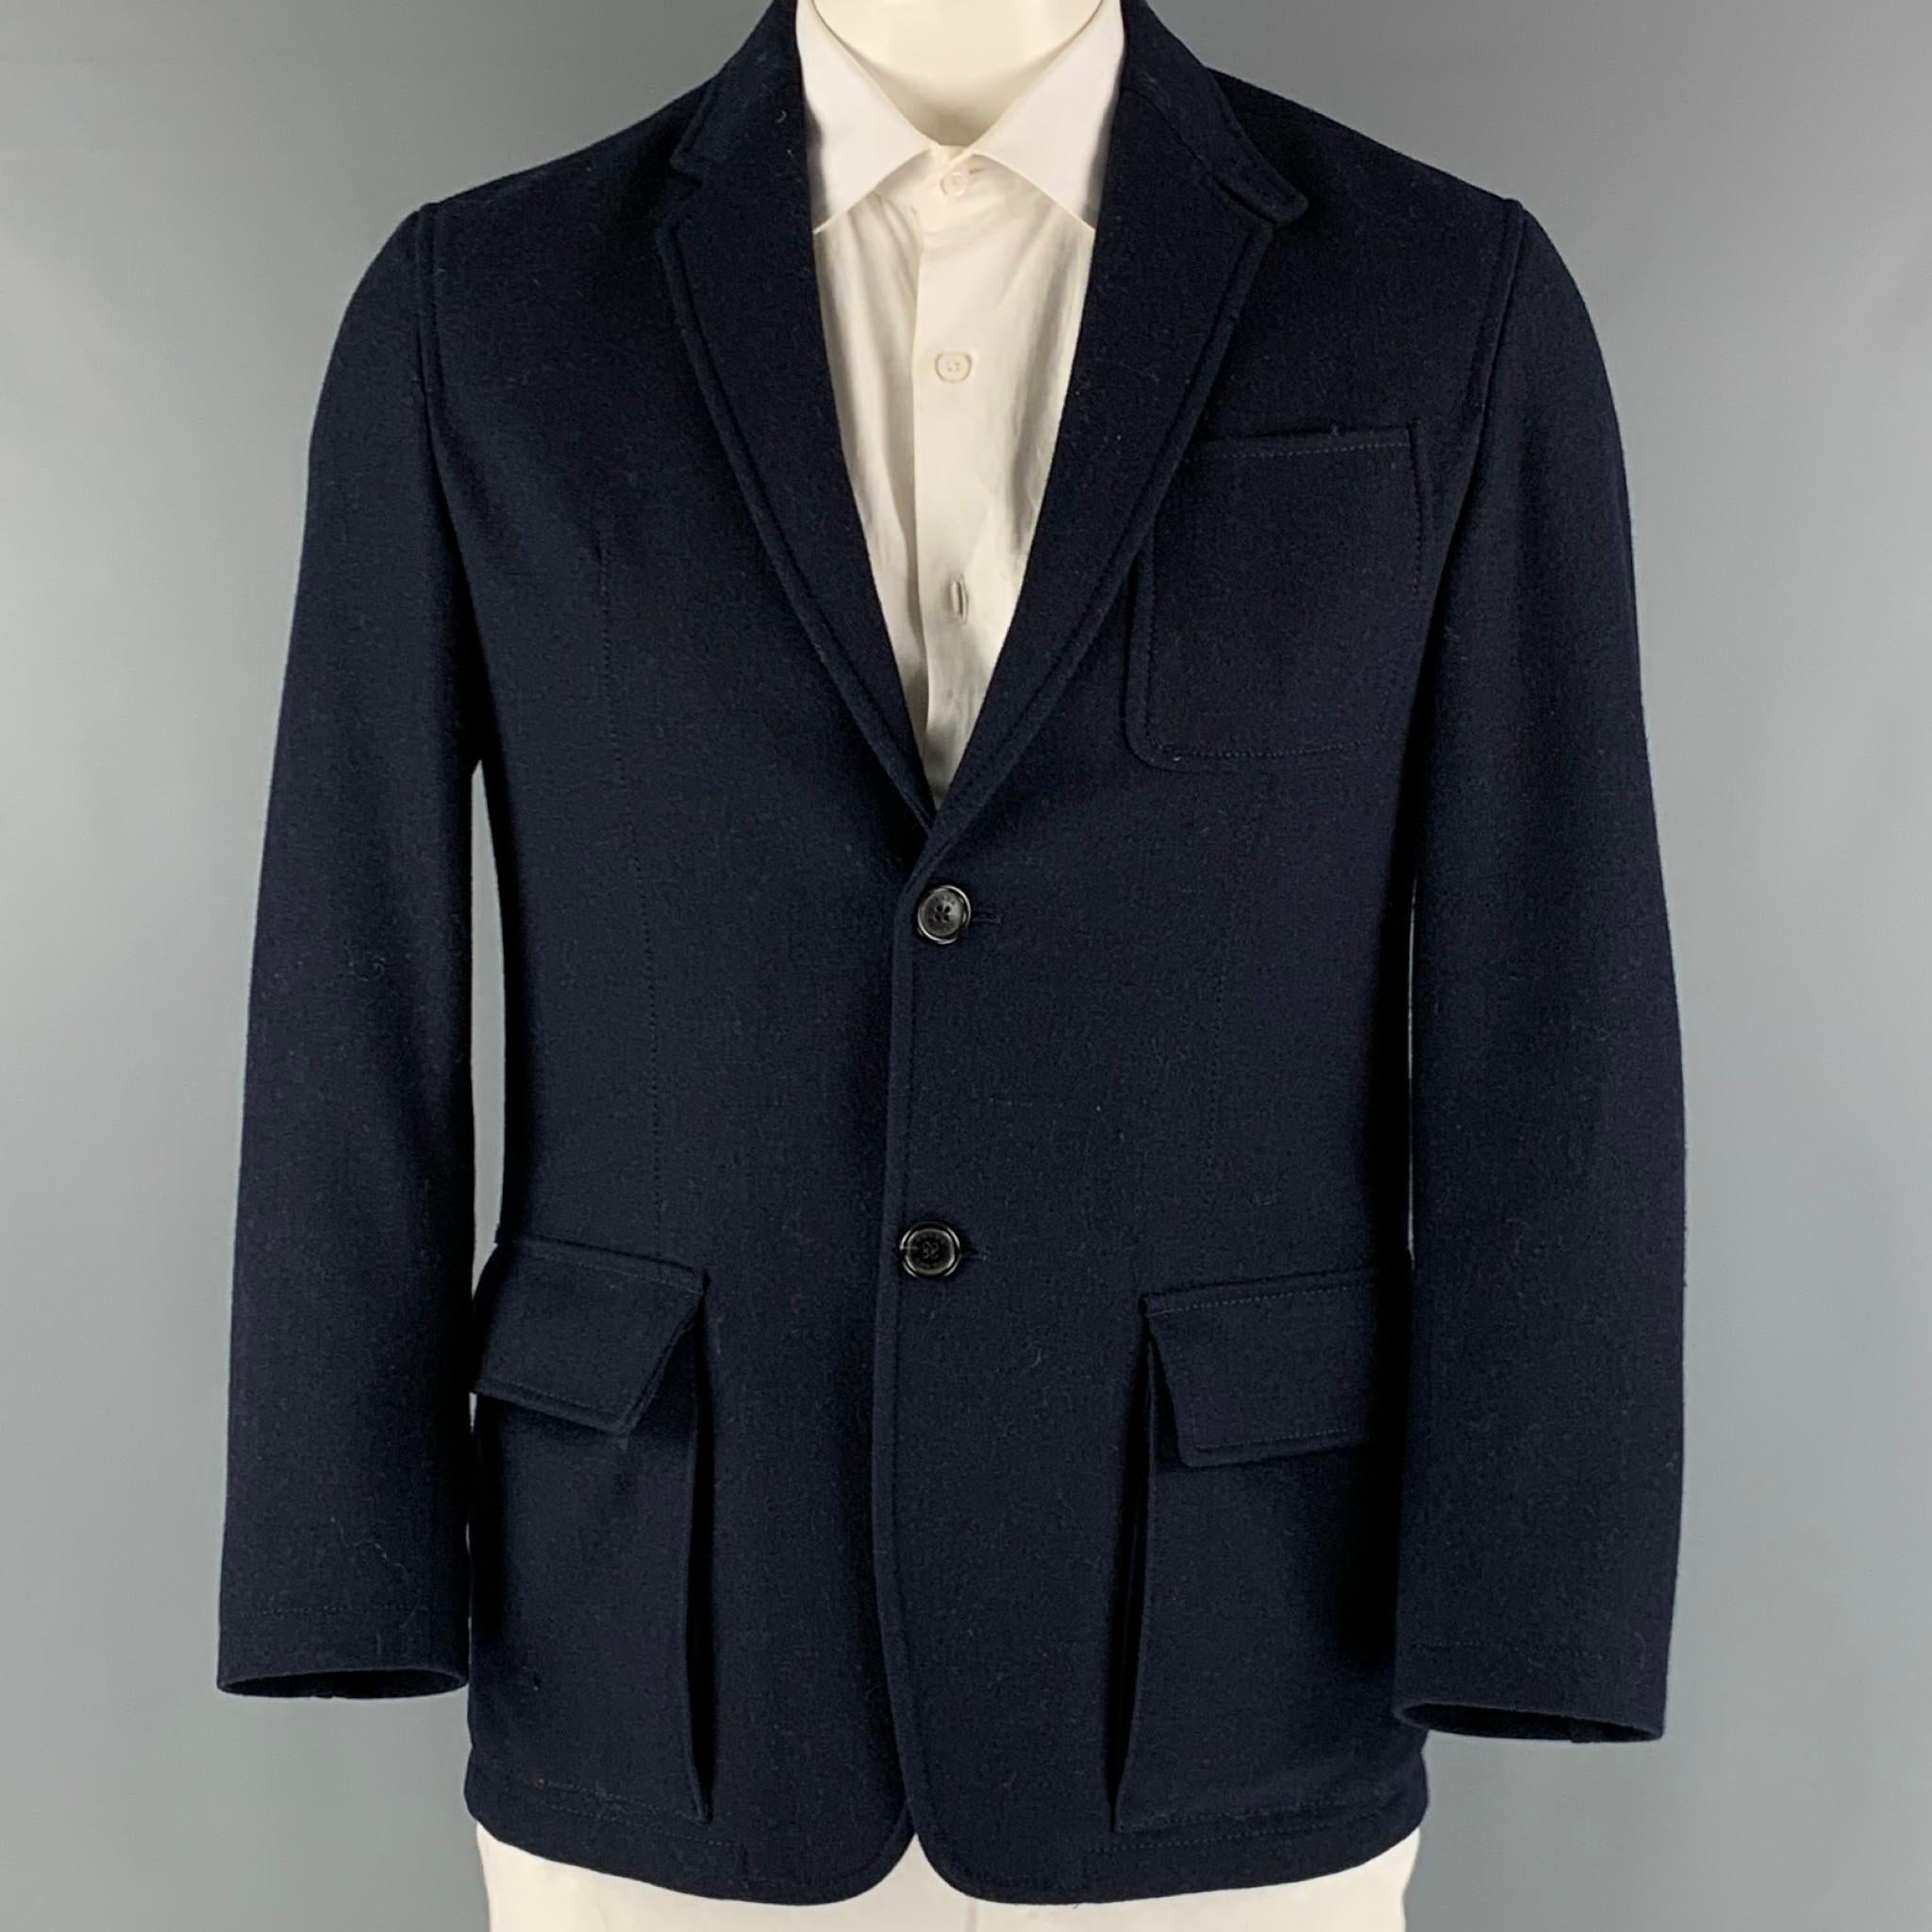 PRADA sport coat comes in a navy wool woven material with a full liner featuring a notch lapel, patch pockets, single back vent, and a double button closure.

Excellent Pre-Owned Condition.
Marked: 52

Measurements:

Shoulder: 18 in.
Chest: 40